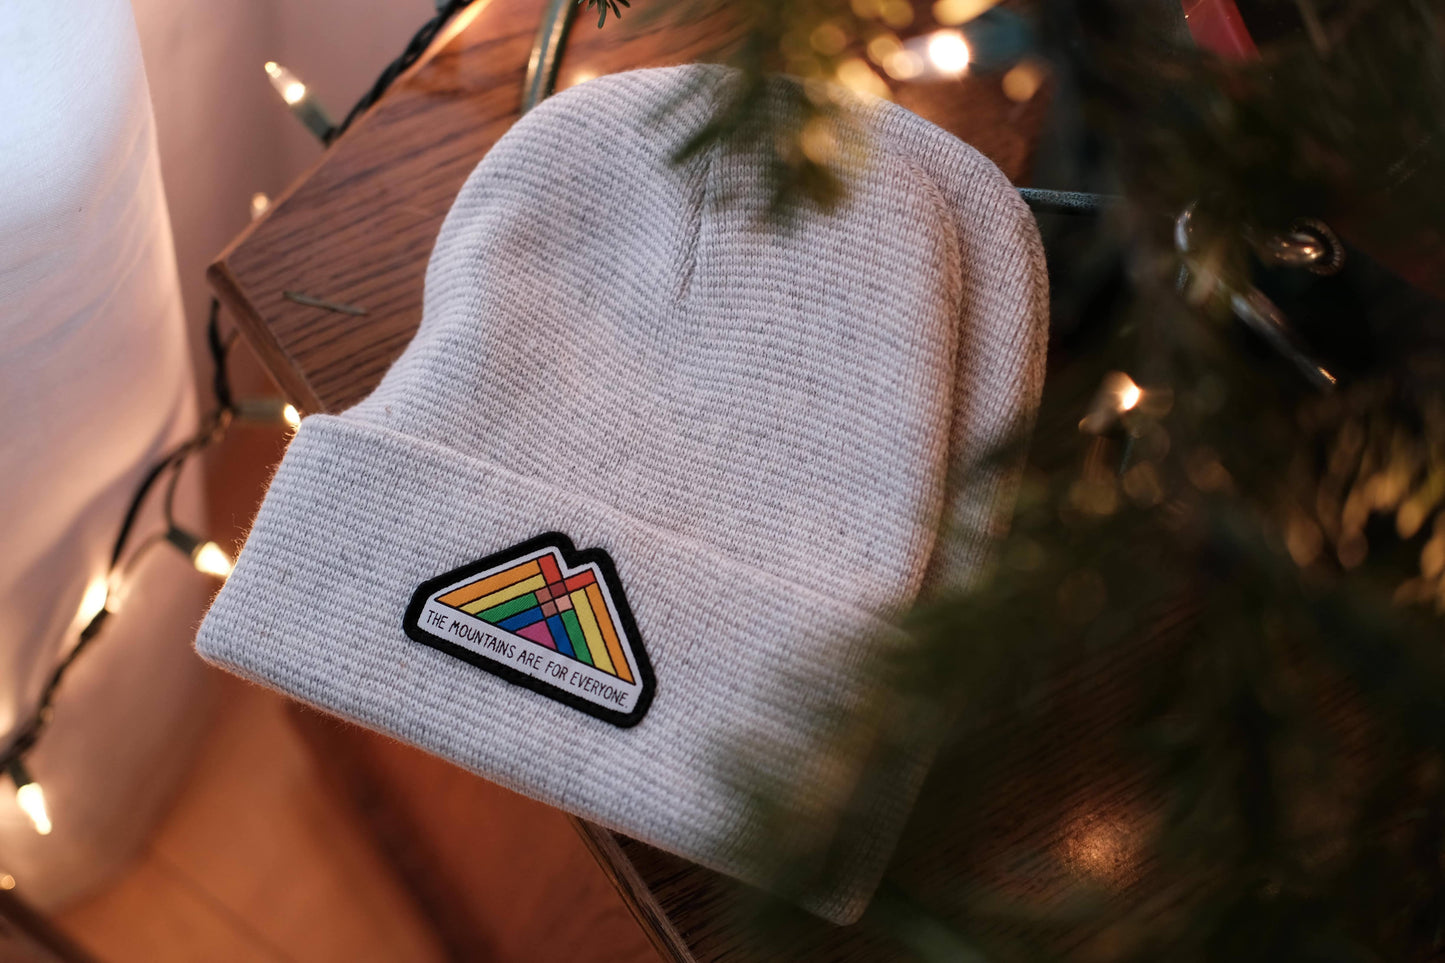 The Mountains are for everyone Beanie | Ecofriendly